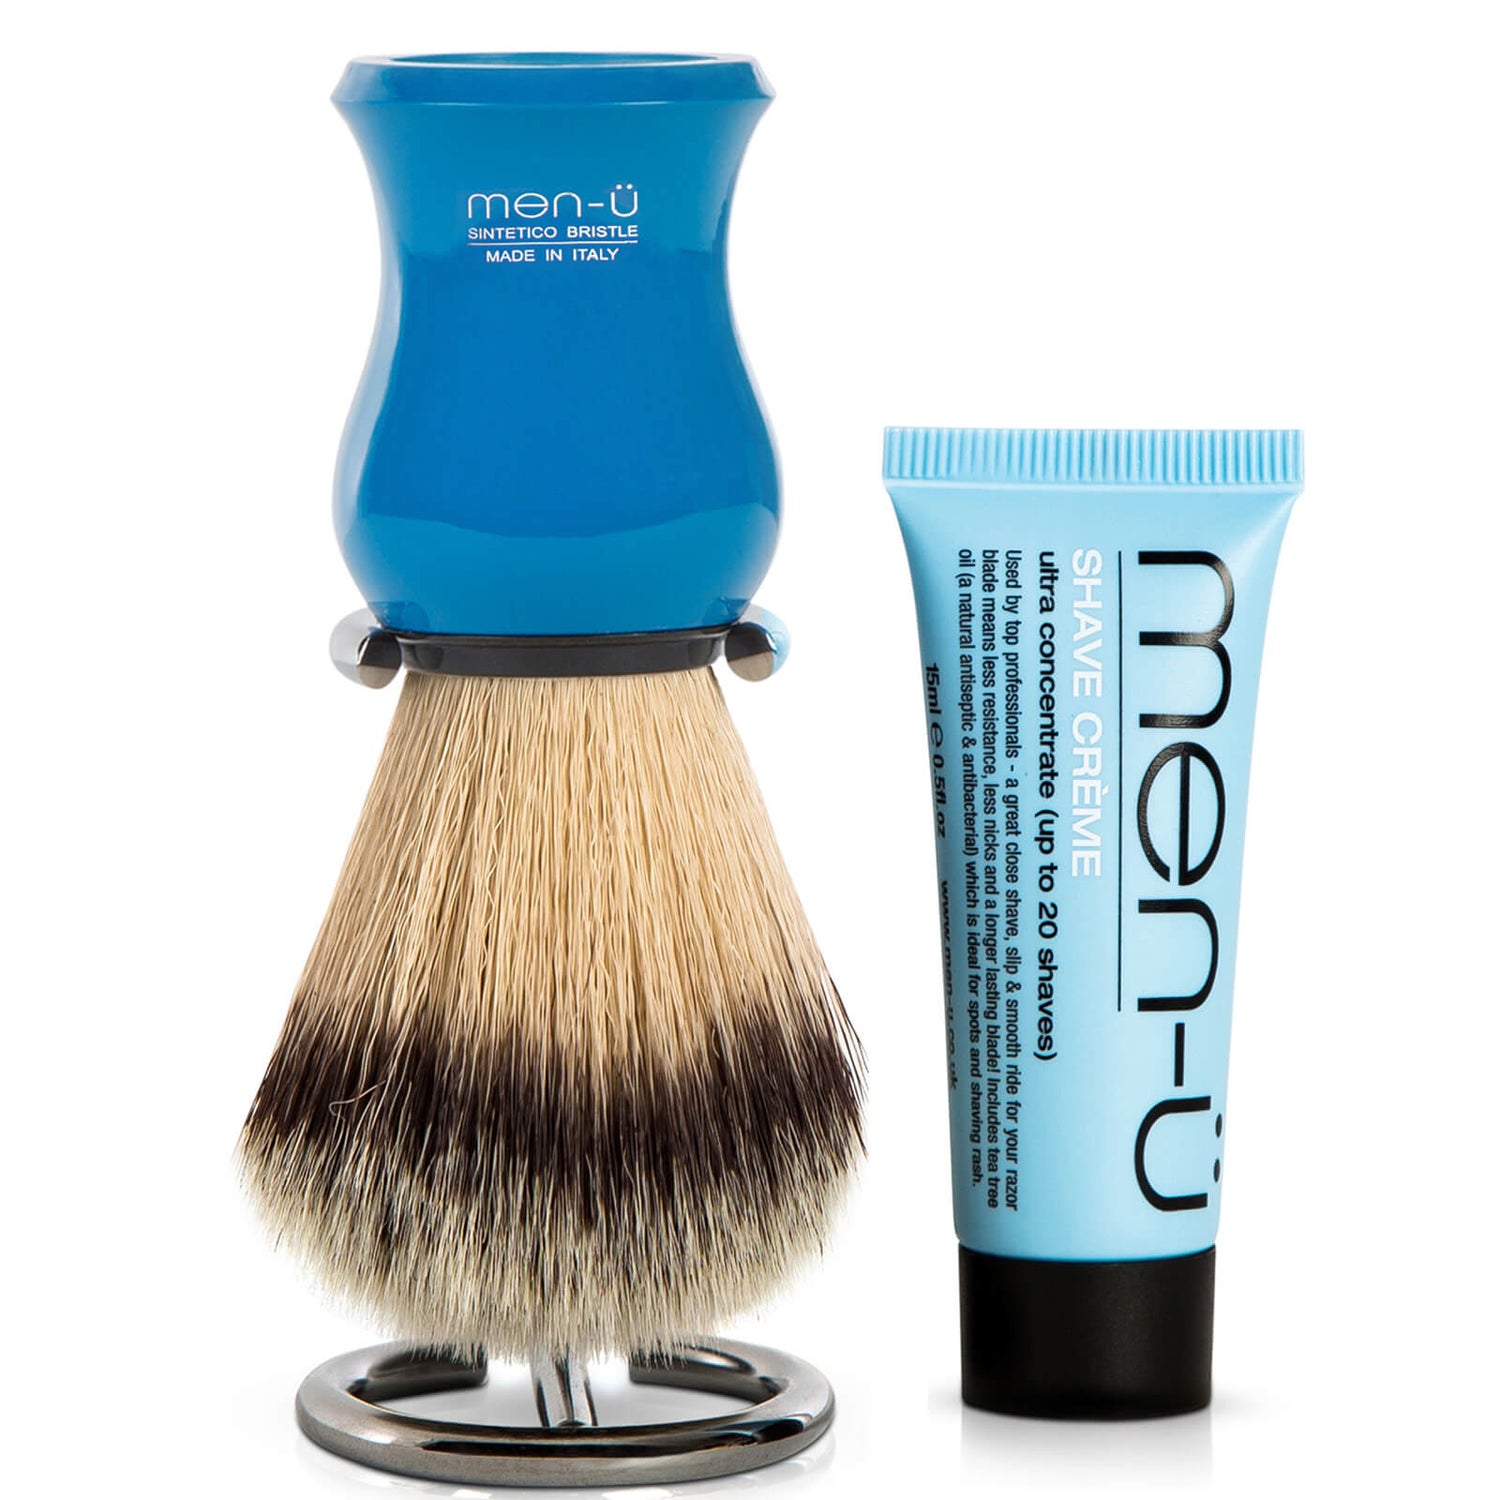 men-ü DB Premier Shave Brush with Chrome Stand - 蓝色